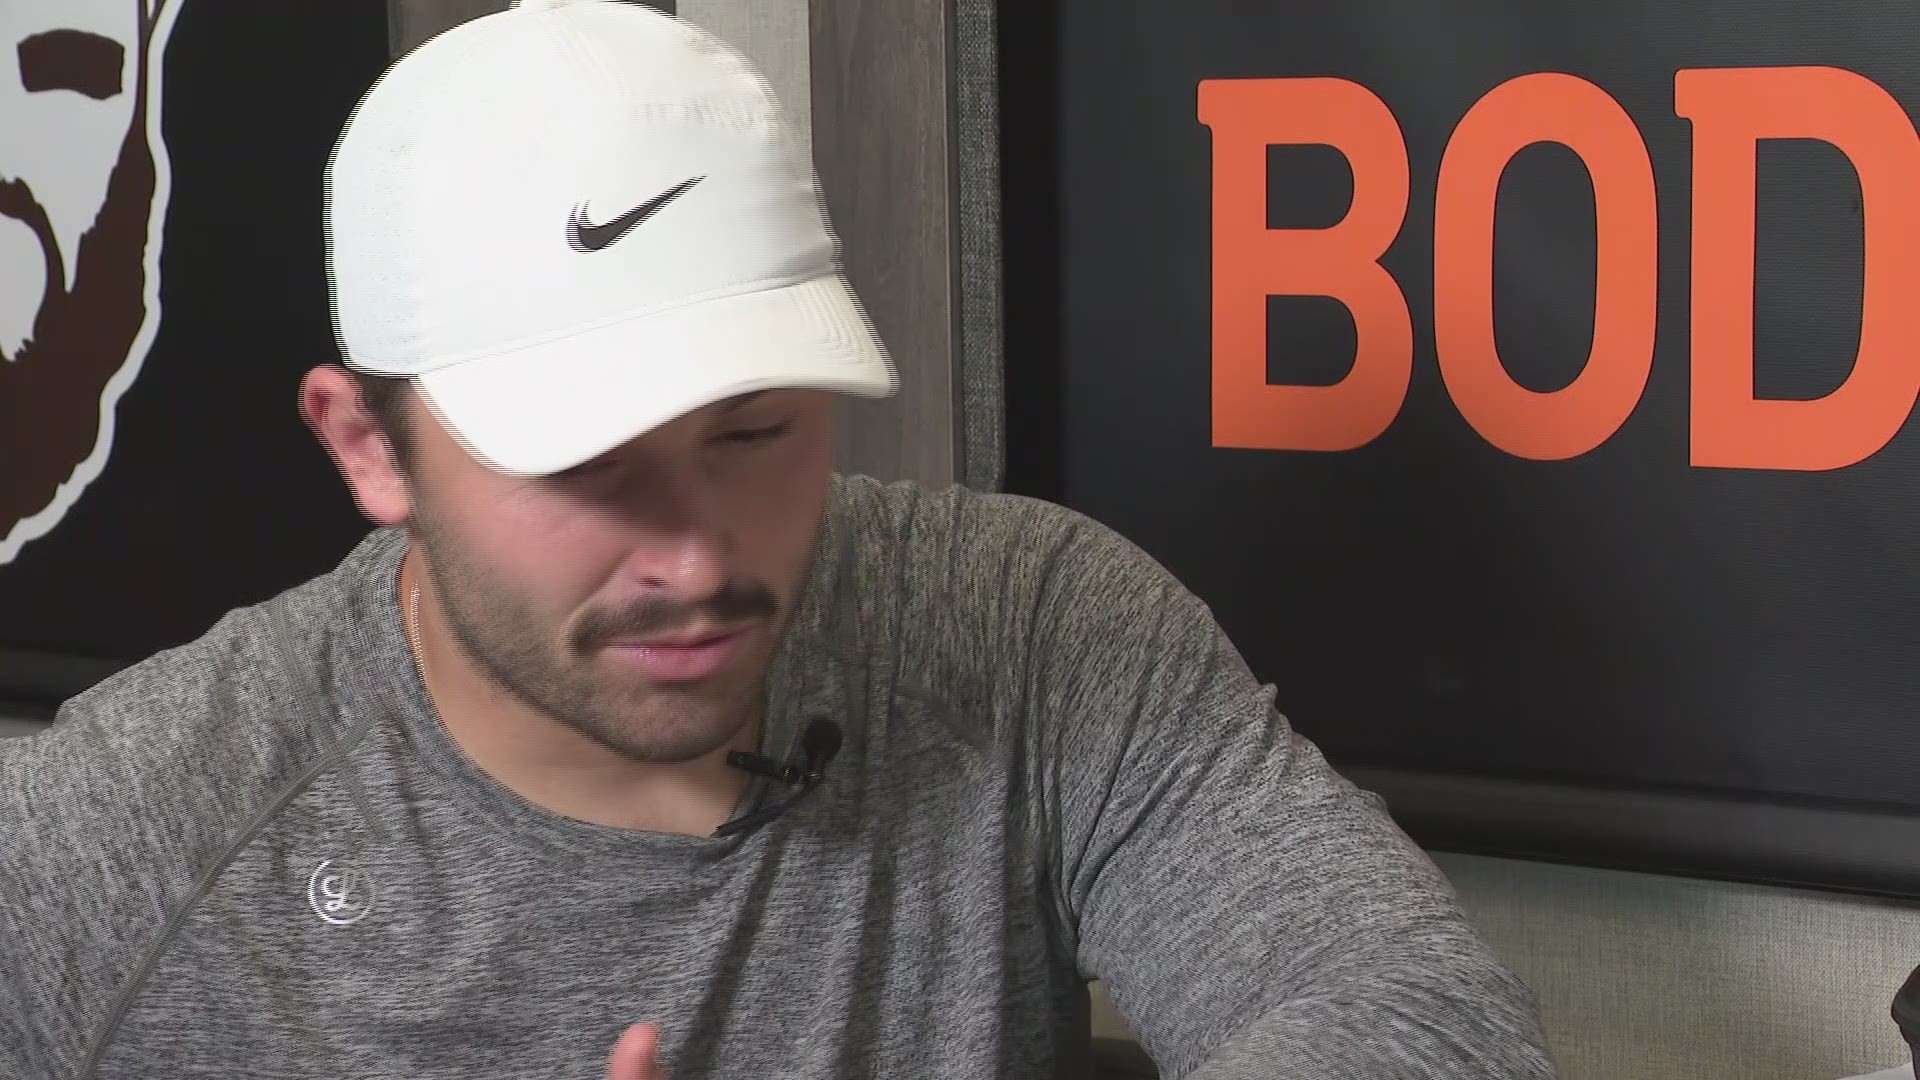 Cleveland Browns QB Baker Mayfield explains why he enjoys playing marbles. Mayfield joined WKYC's Jim Donovan for an exclusive interview inside his RV at training camp.